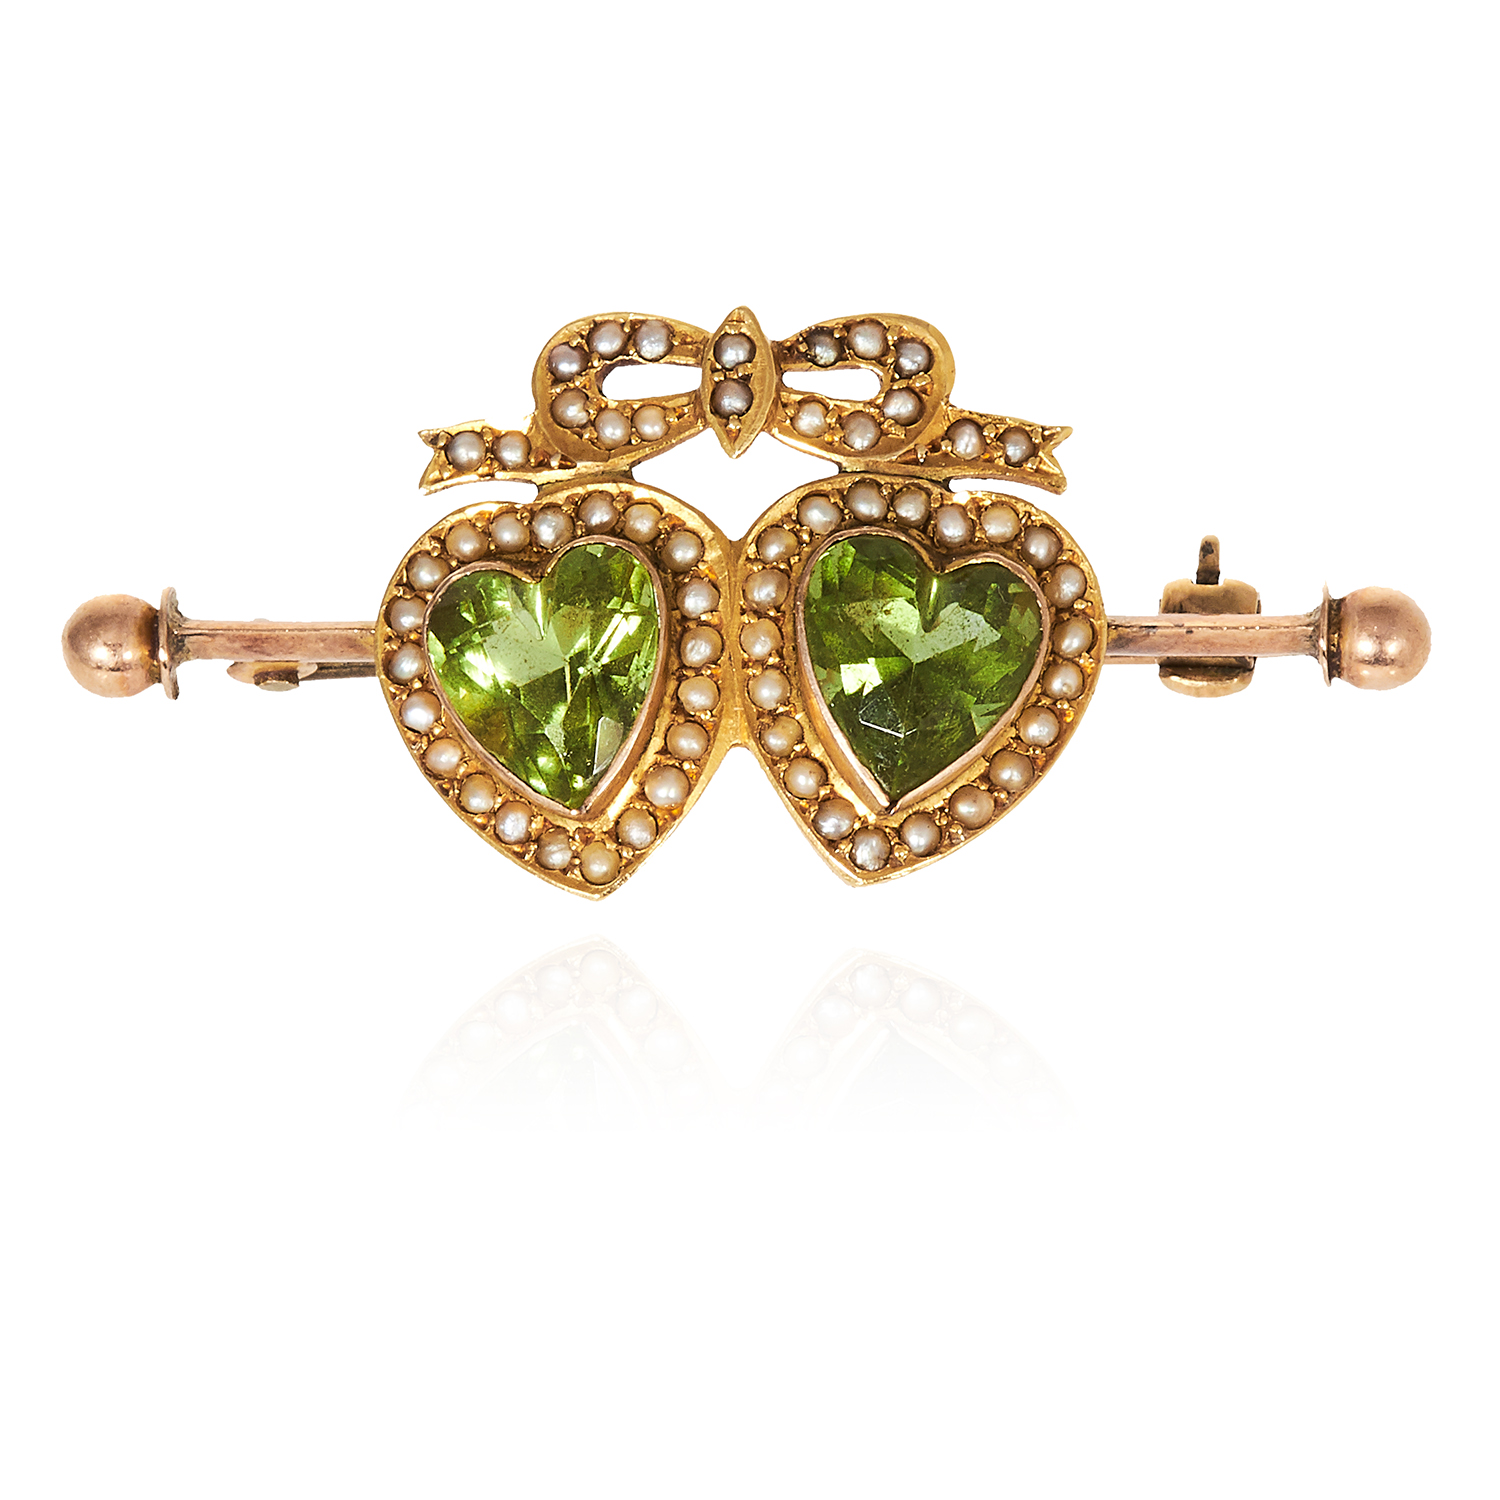 AN ANTIQUE PEARL AND PERIDOT SWEETHEART BROOCH in yellow gold, with ribbon and bow motif jewelled